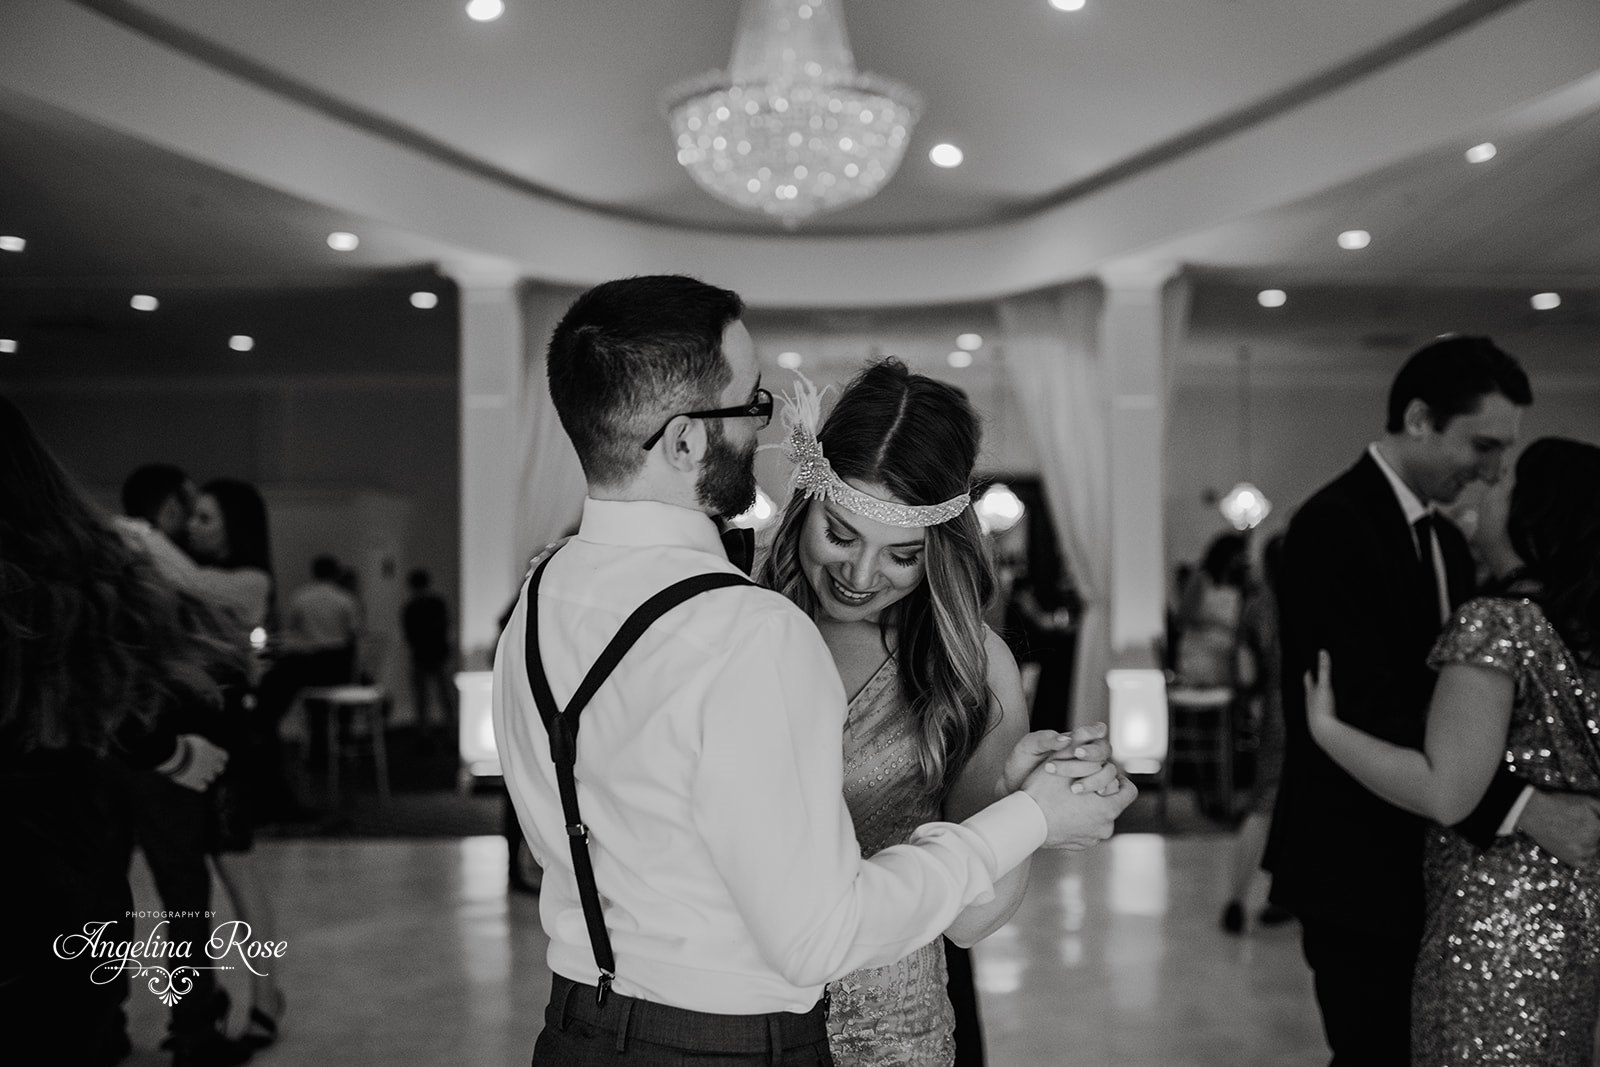 Couple Dances at a Gatsby Party at Avenir Wedding Venue, the hottest 2023 wedding trend